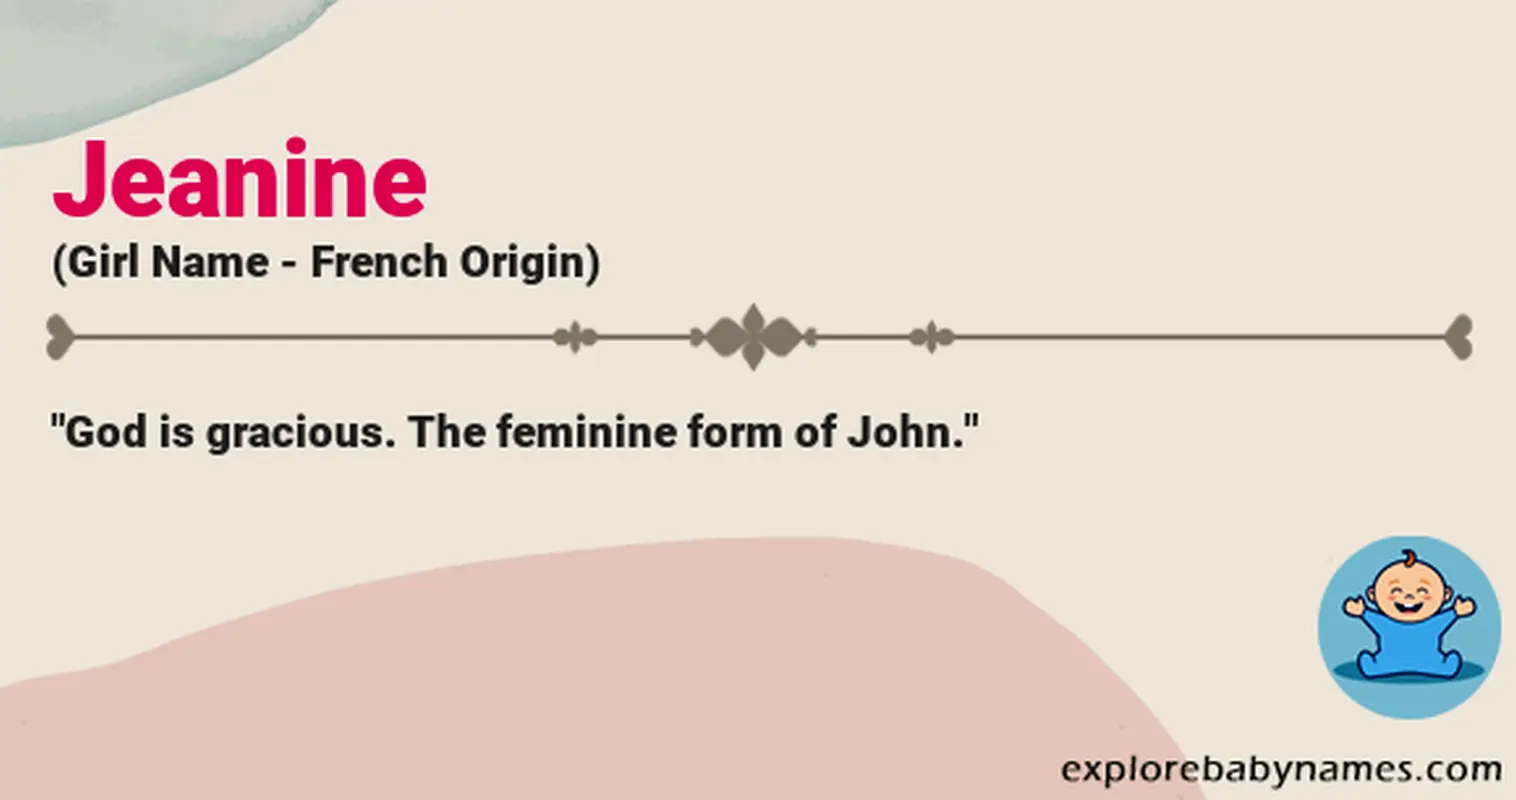 Meaning of Jeanine